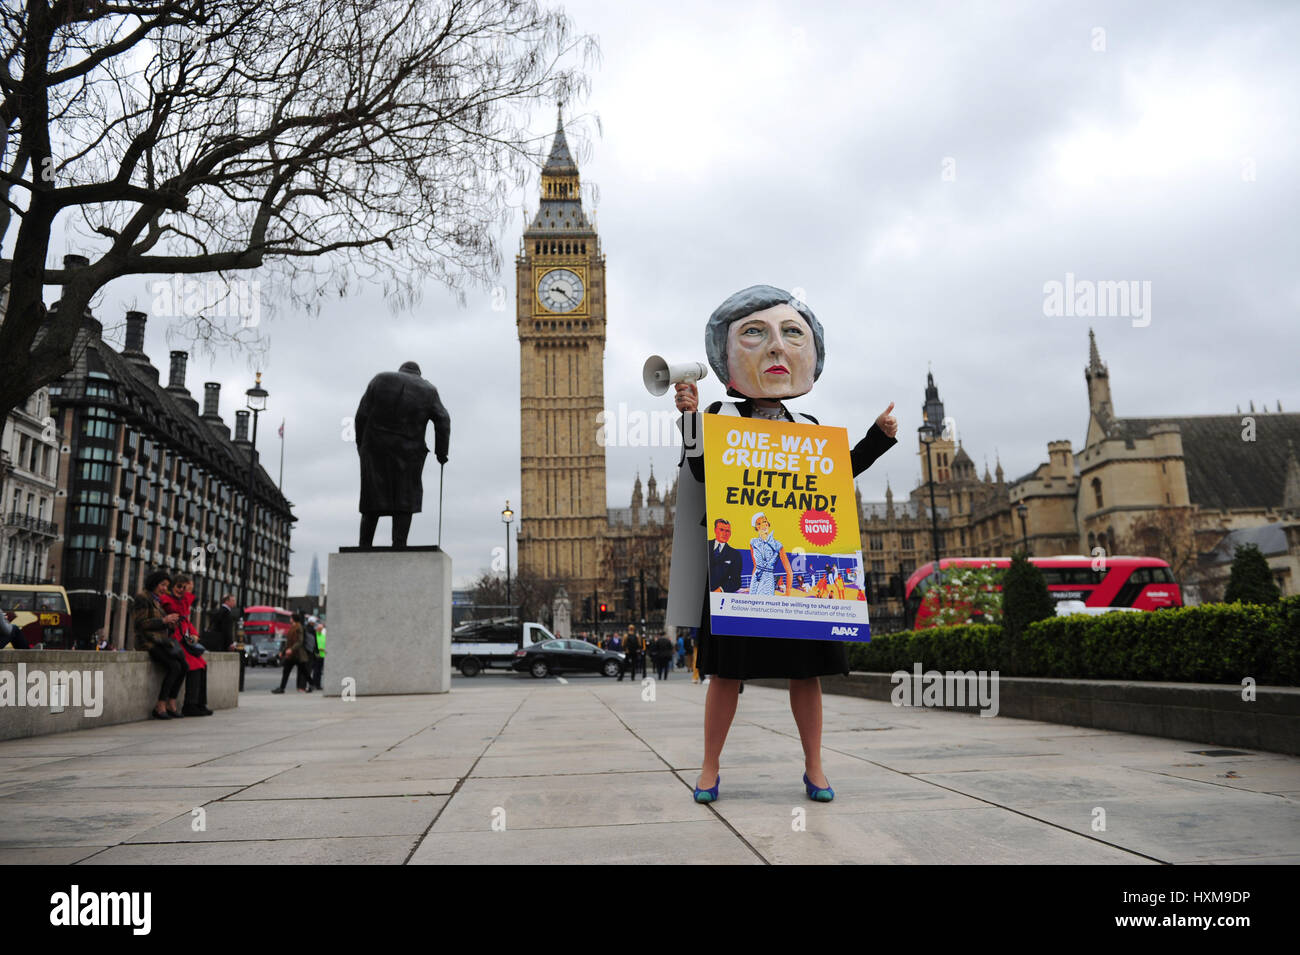 A giant headed Theresa May in Parliament Square, London during a protest by Avaaz after PM signed a letter to trigger Article 50 that starts the formal exit process by the UK from the European Union. Stock Photo